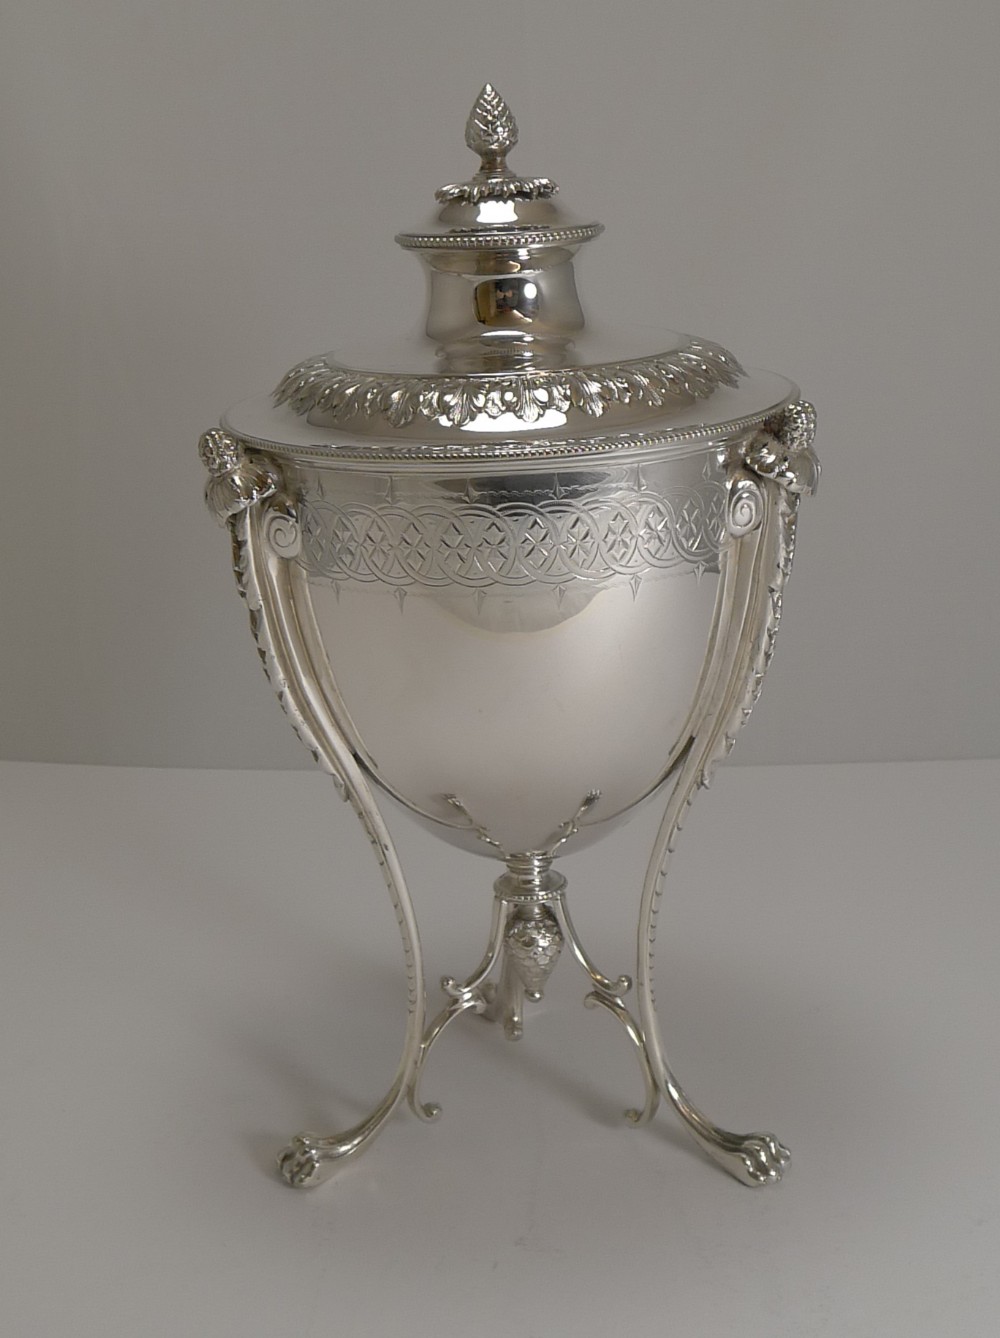 grand antique english silver plate biscuit box by martin hall co c1860